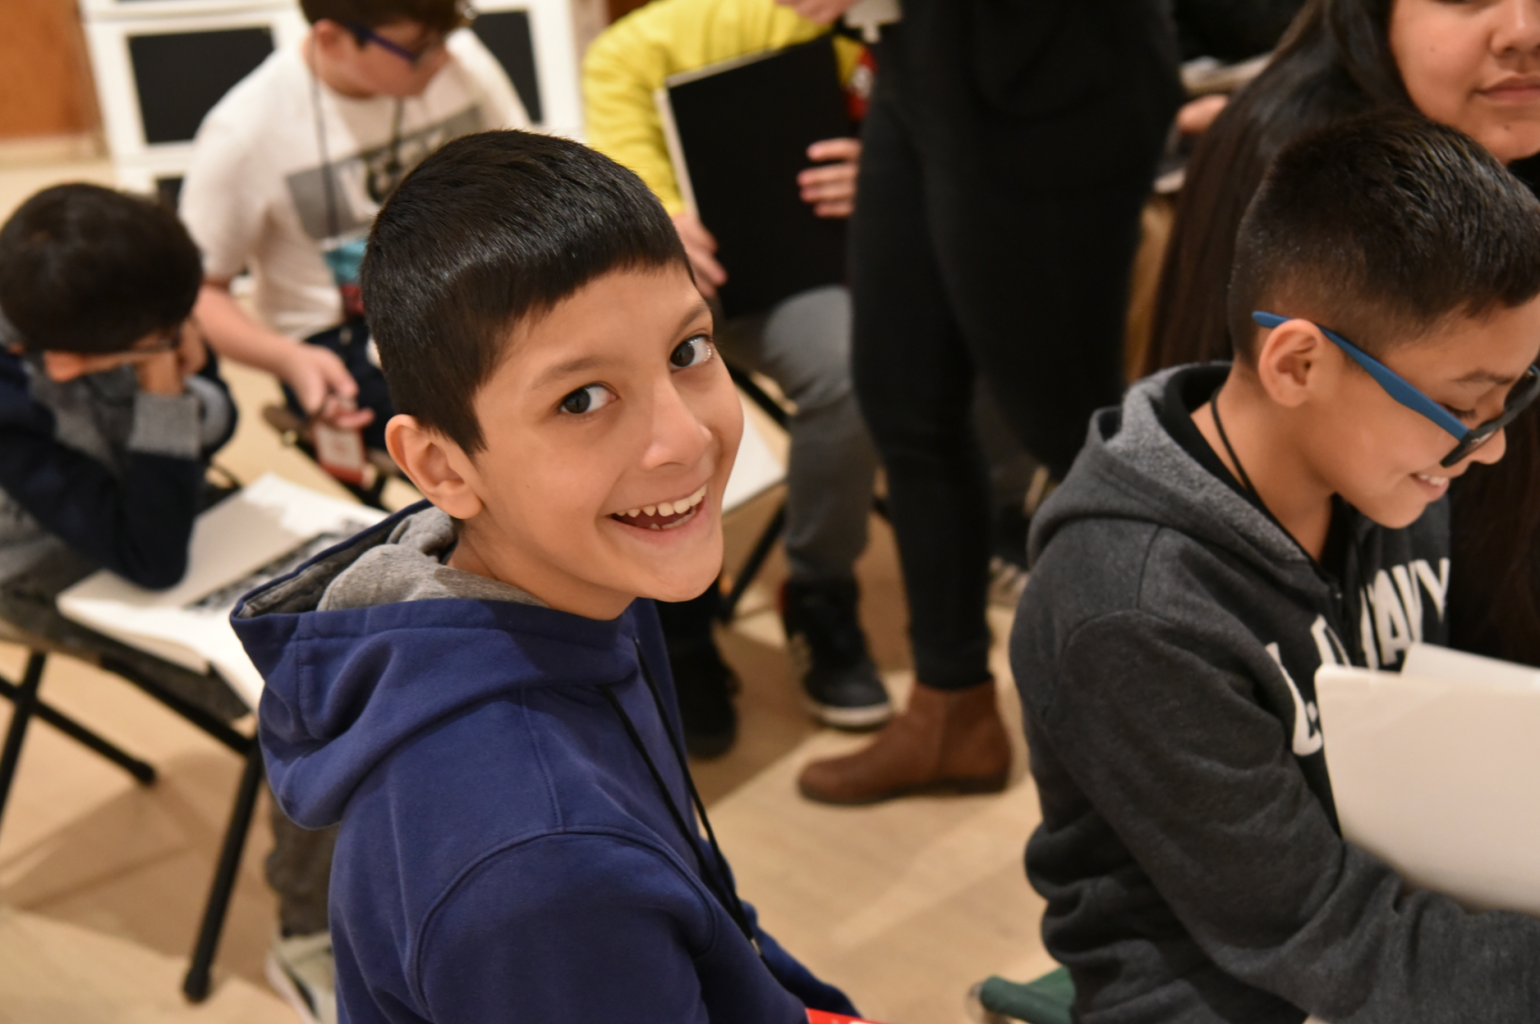 One student smiles at the camera, as others sit around working on an activity.